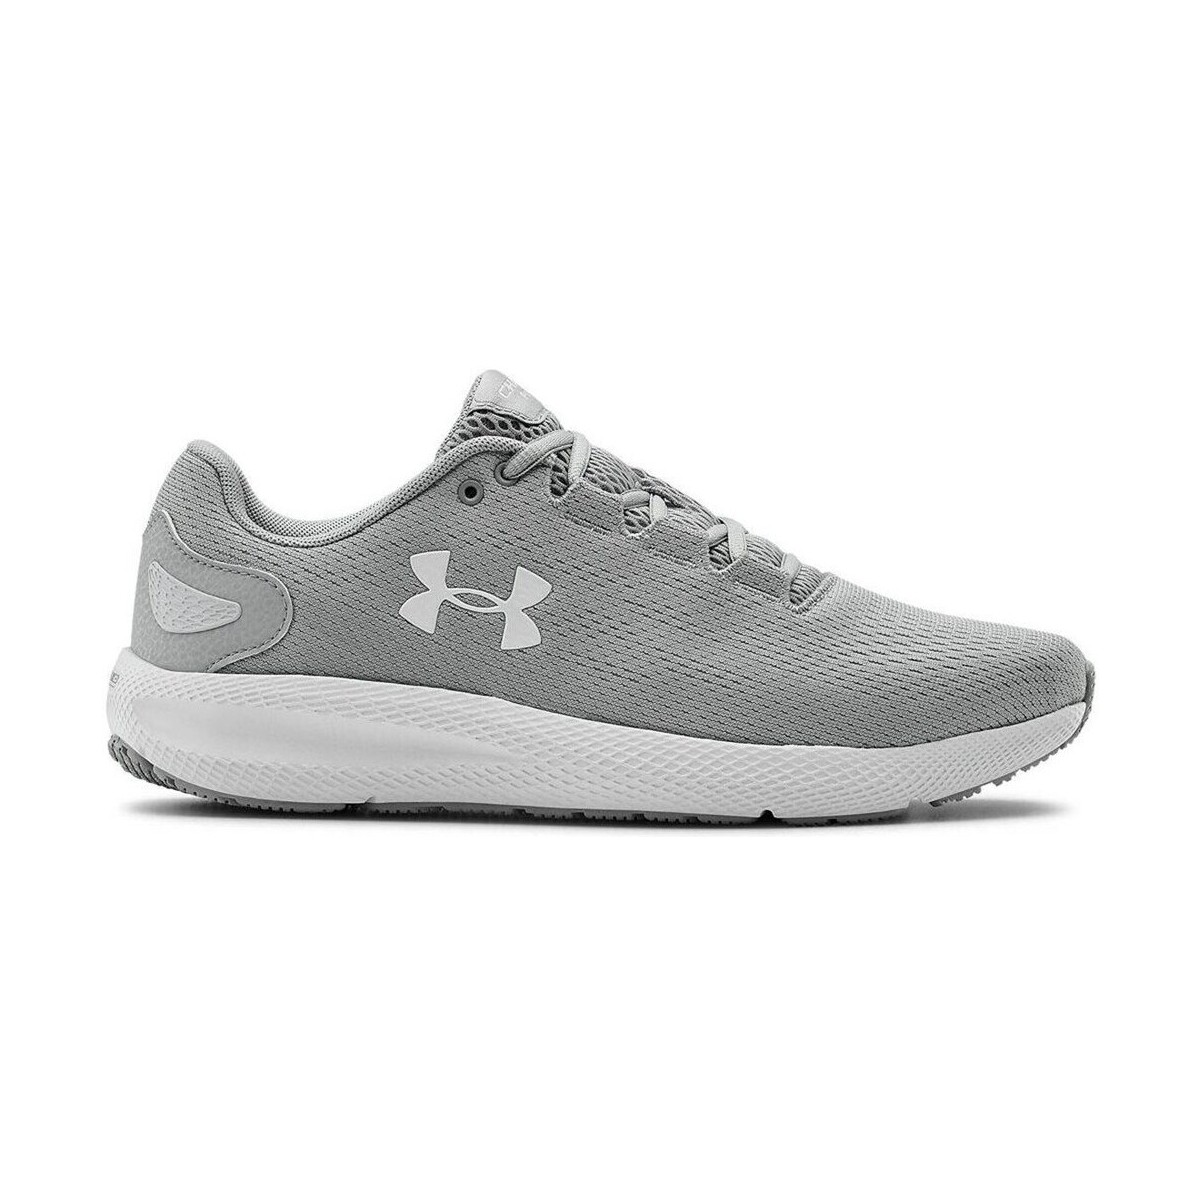 Under Armour Charged 2 Pursuit Grey